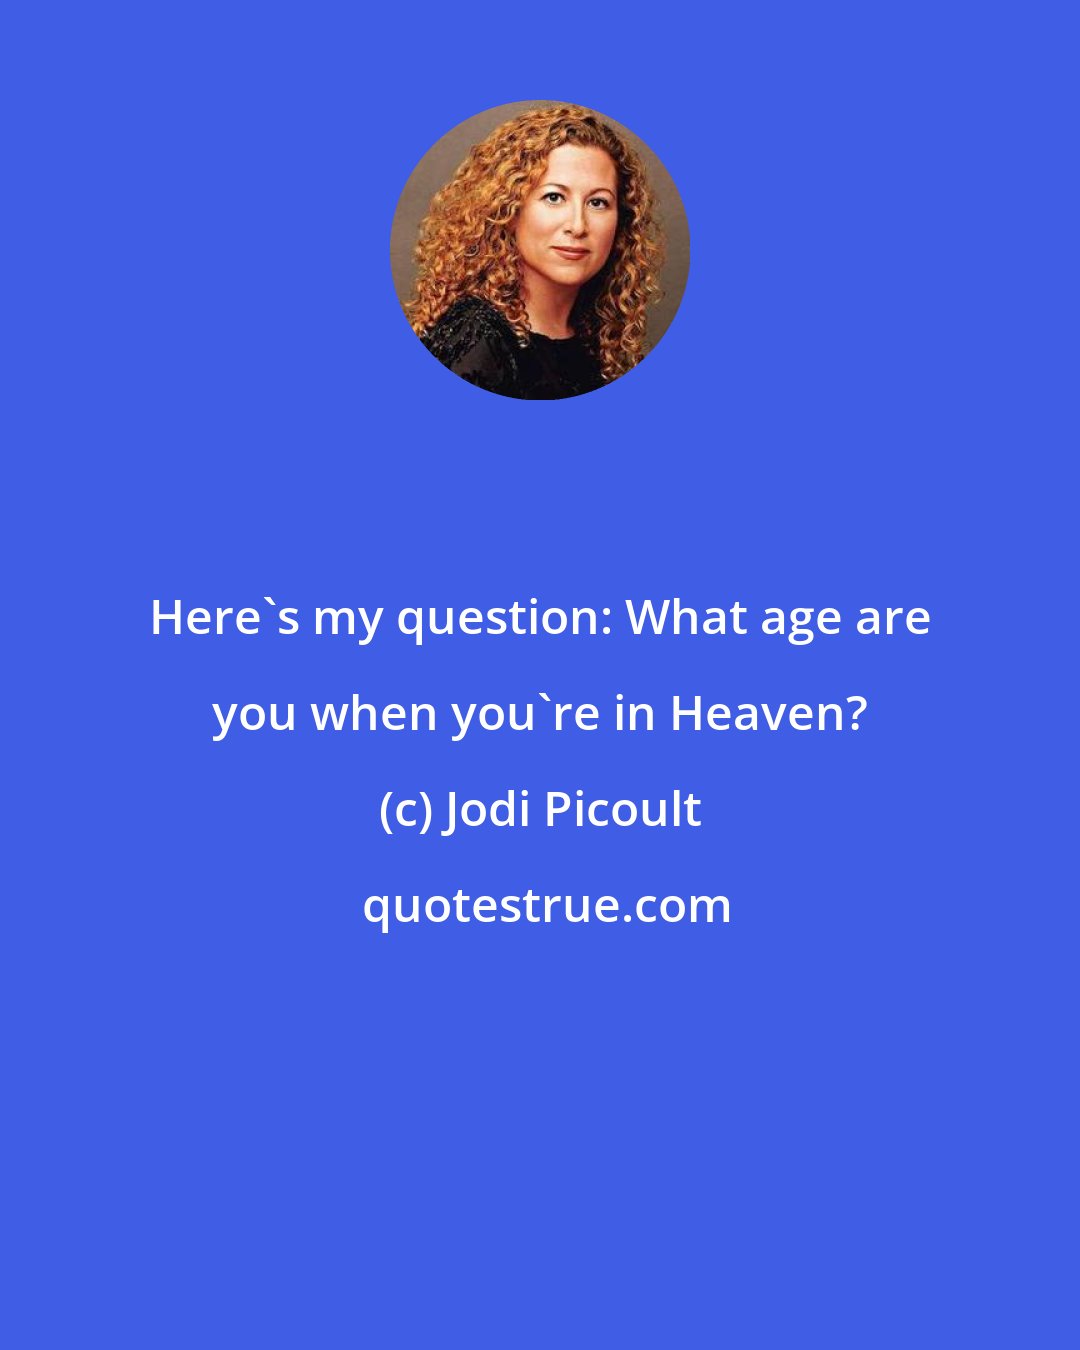 Jodi Picoult: Here's my question: What age are you when you're in Heaven?